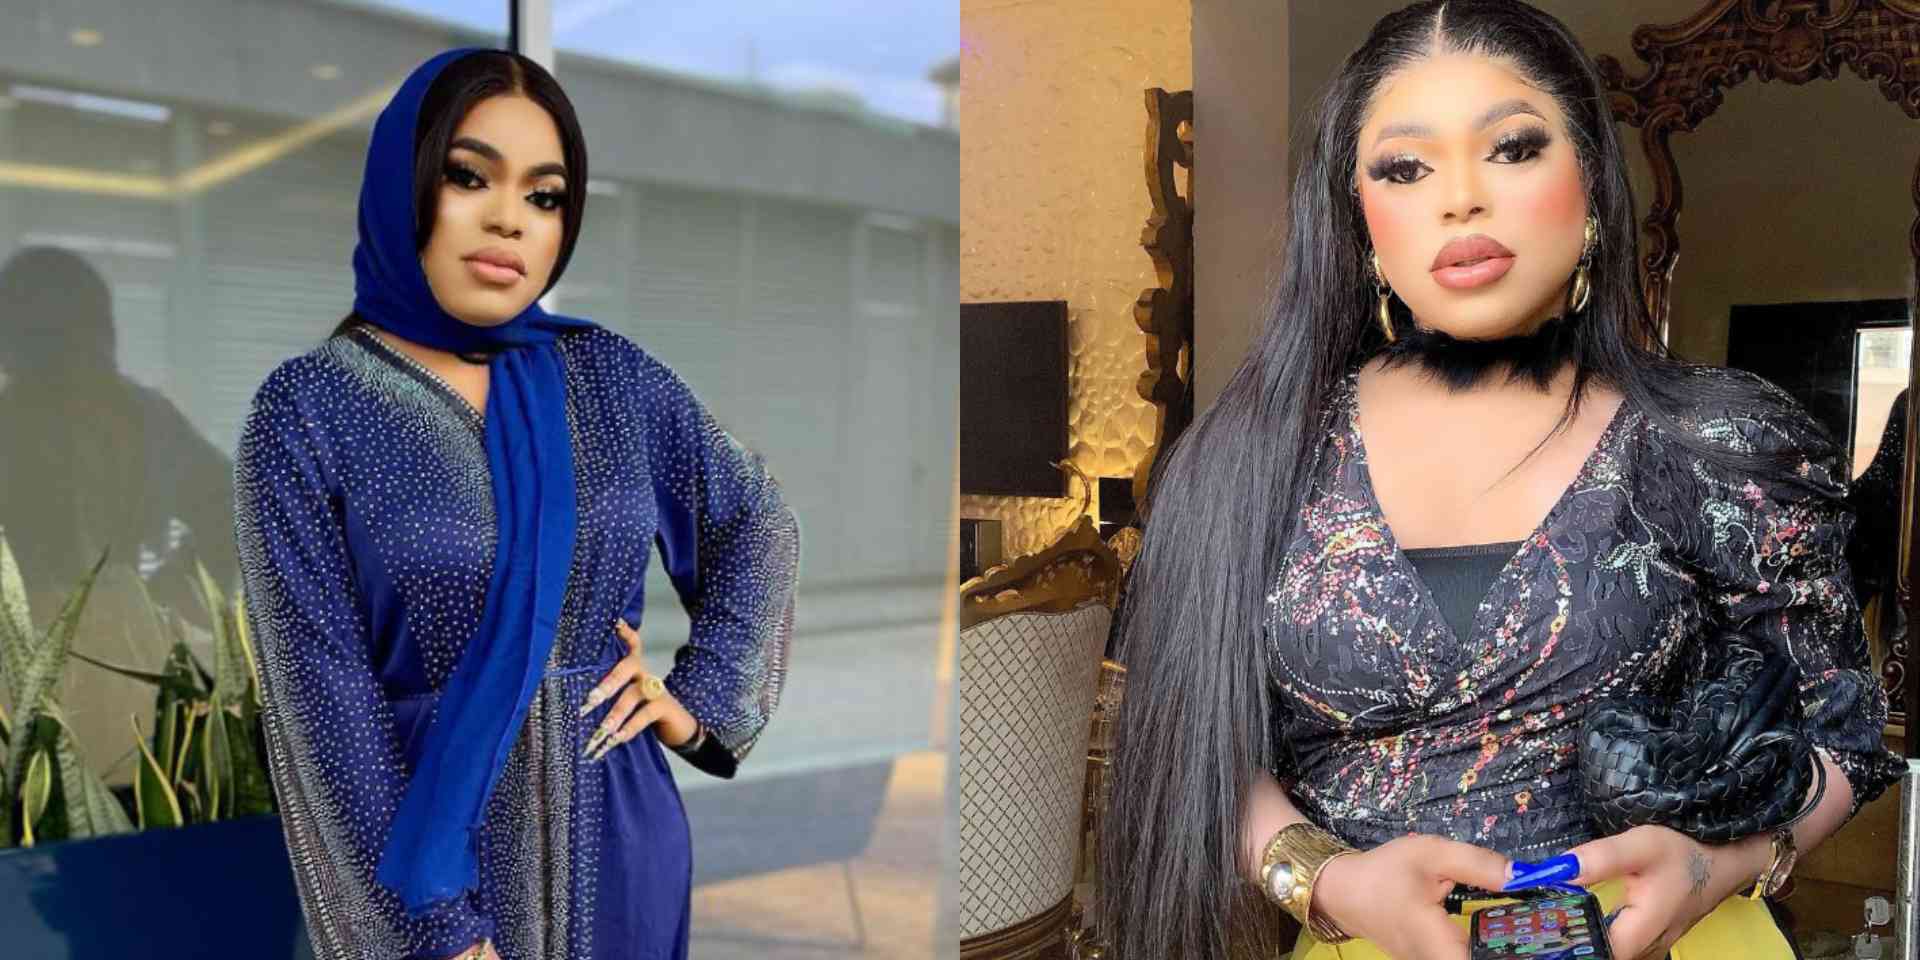 "Relationship no de sweet without money" - Bobrisky rejects poor suitor who asked him out on a date